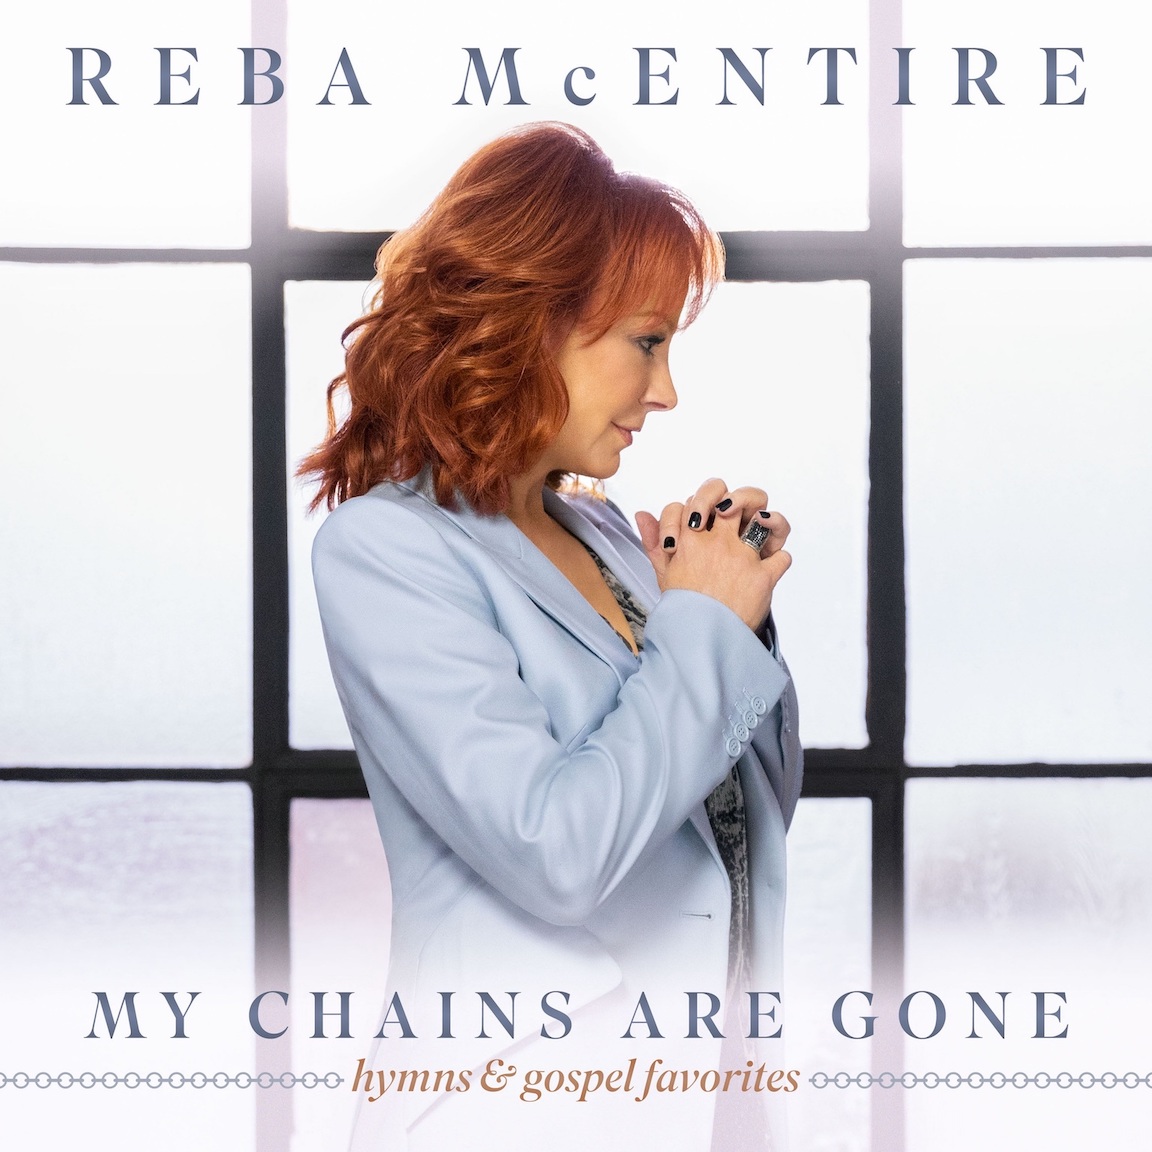 Reba McEntire, `My Chains Are Gone` (Photo courtesy of Universal Music Group Nashville)